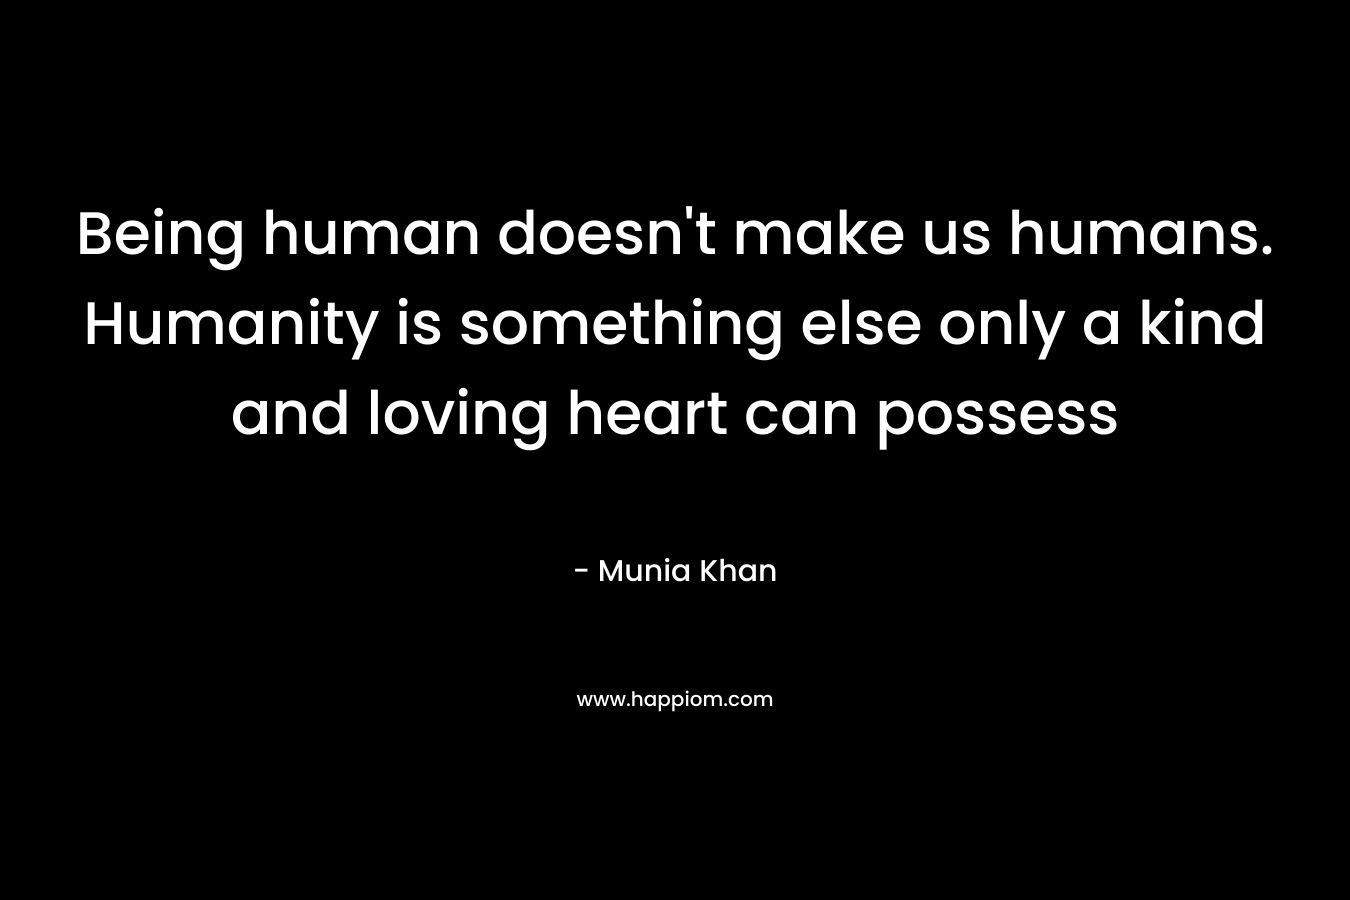 Being human doesn't make us humans. Humanity is something else only a kind and loving heart can possess